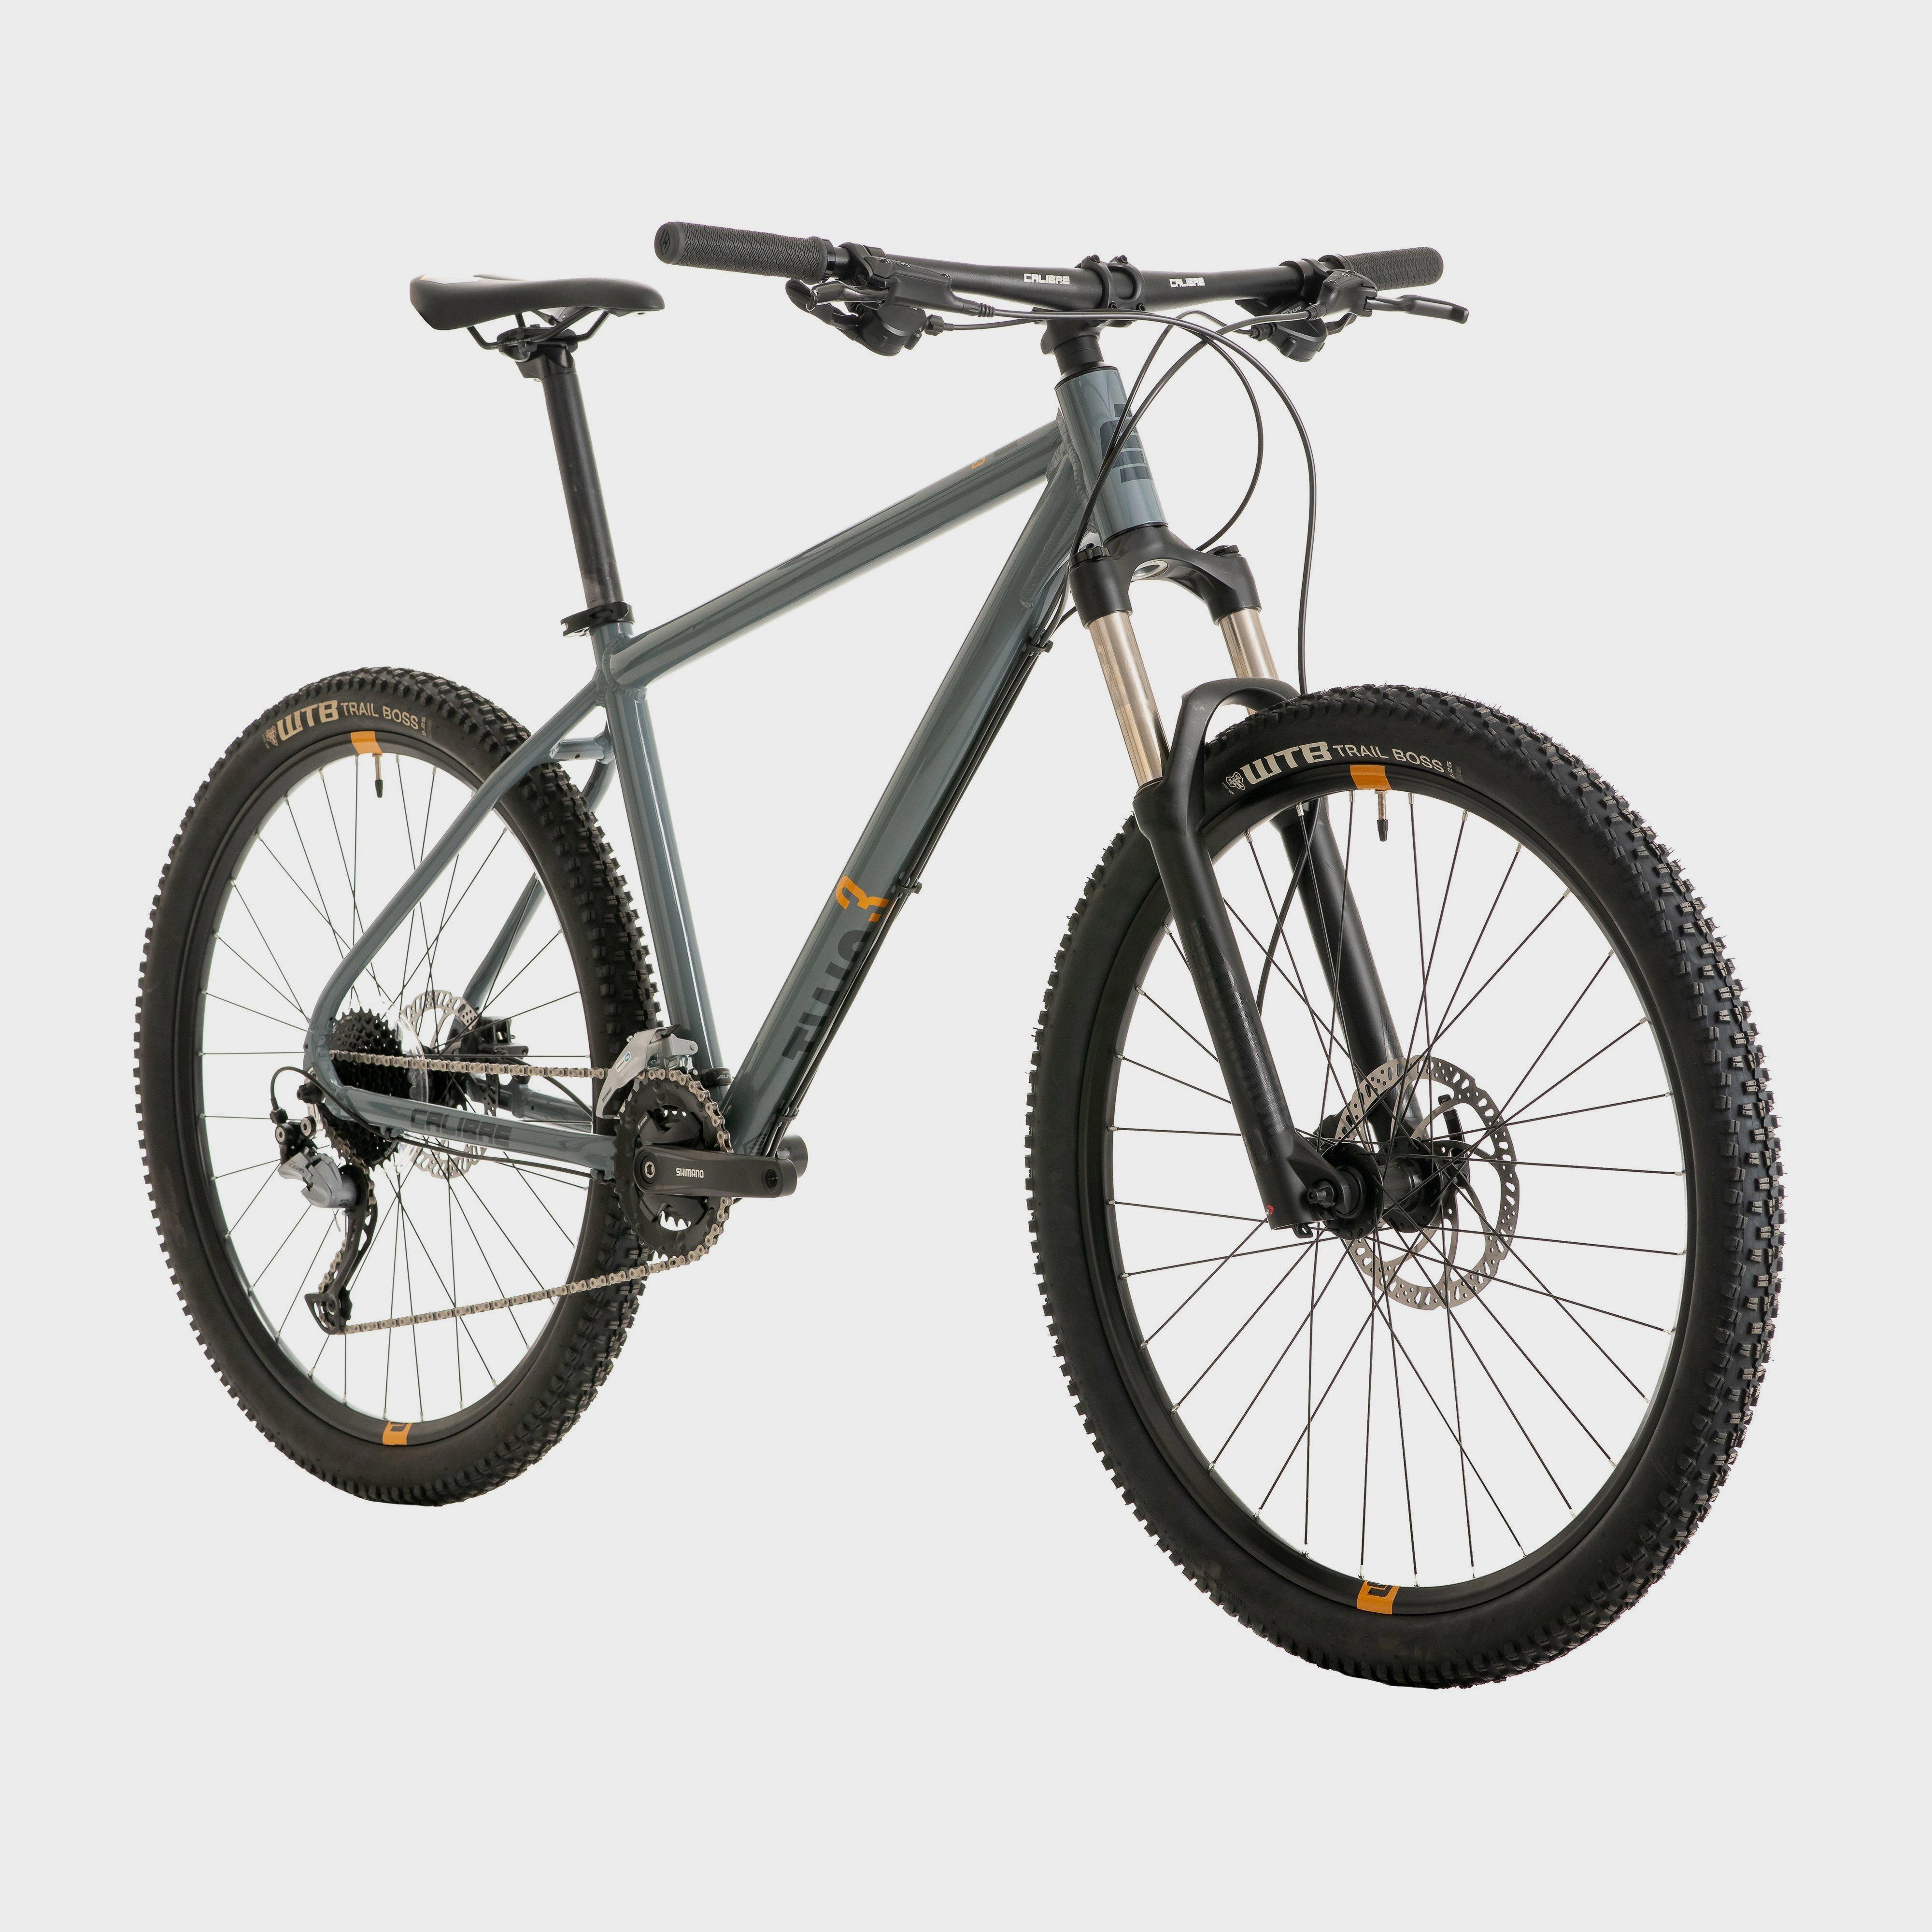 Calibre Two Cubed Hardtail Mountain Bike Review